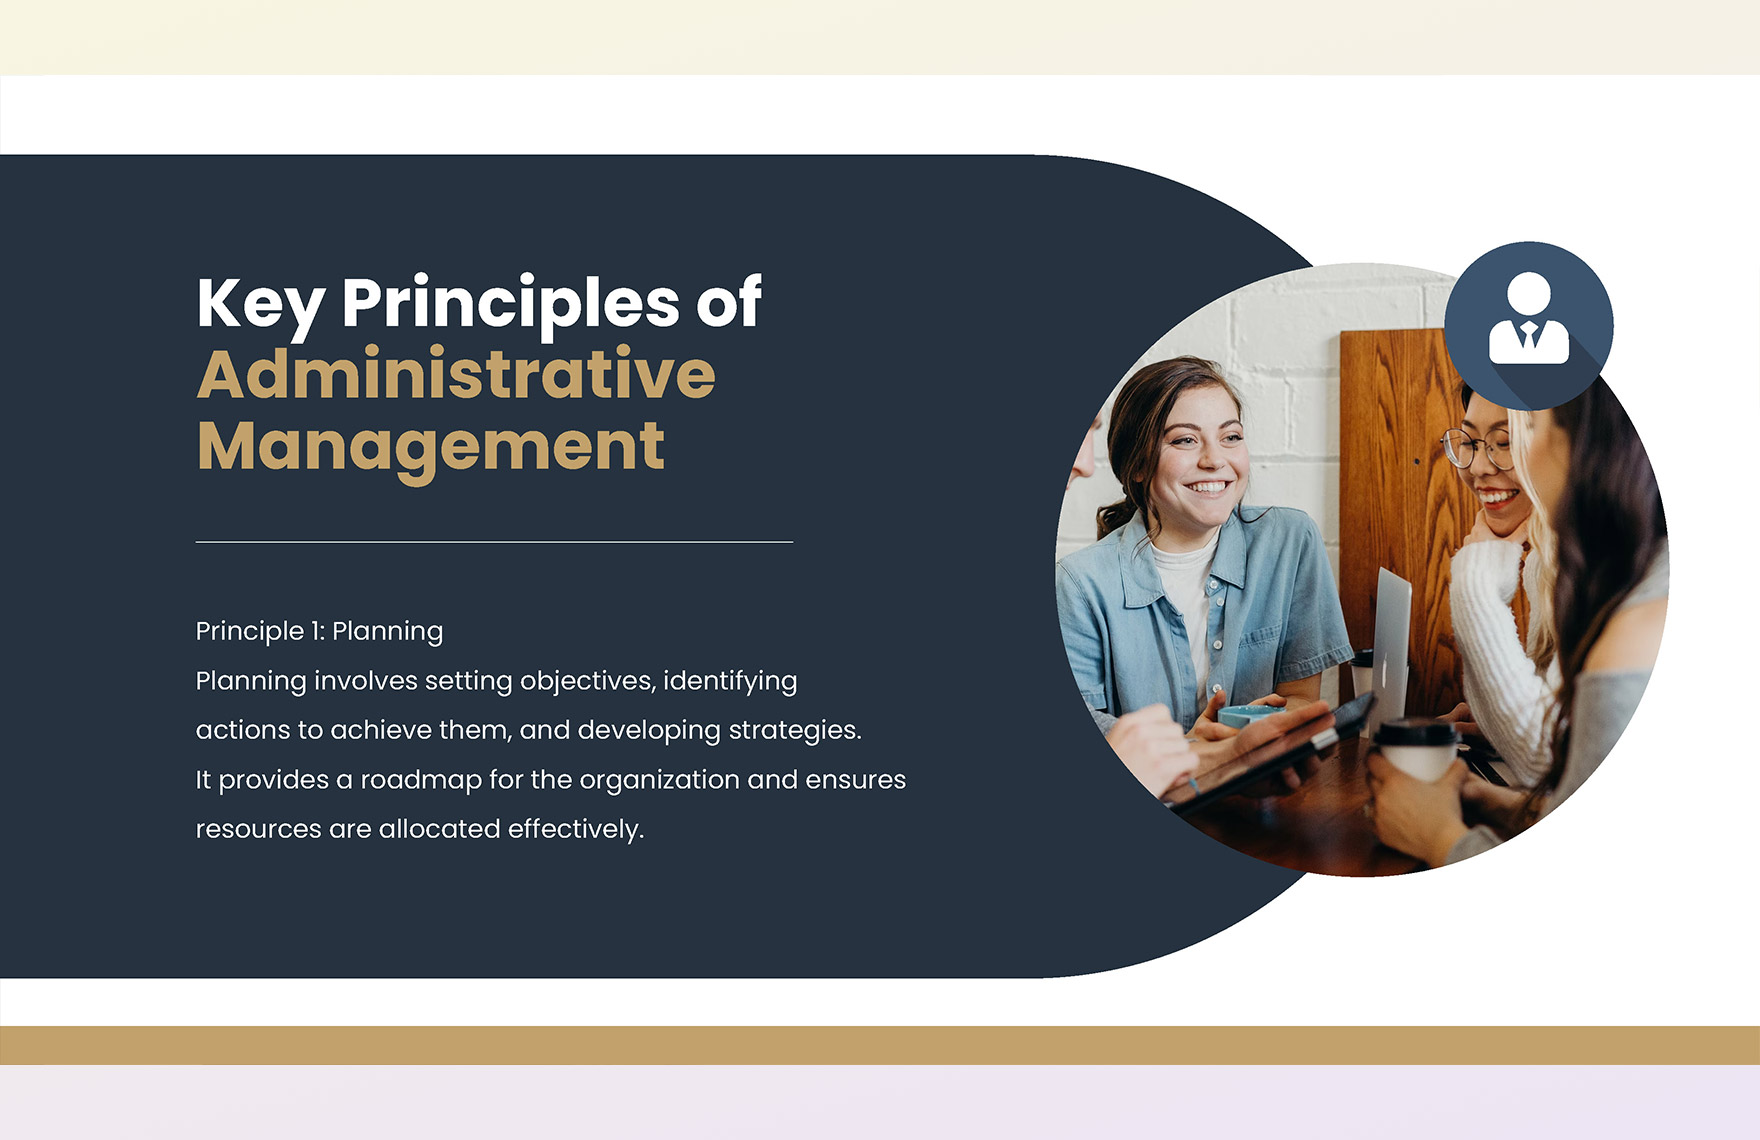 Administrative Management Template